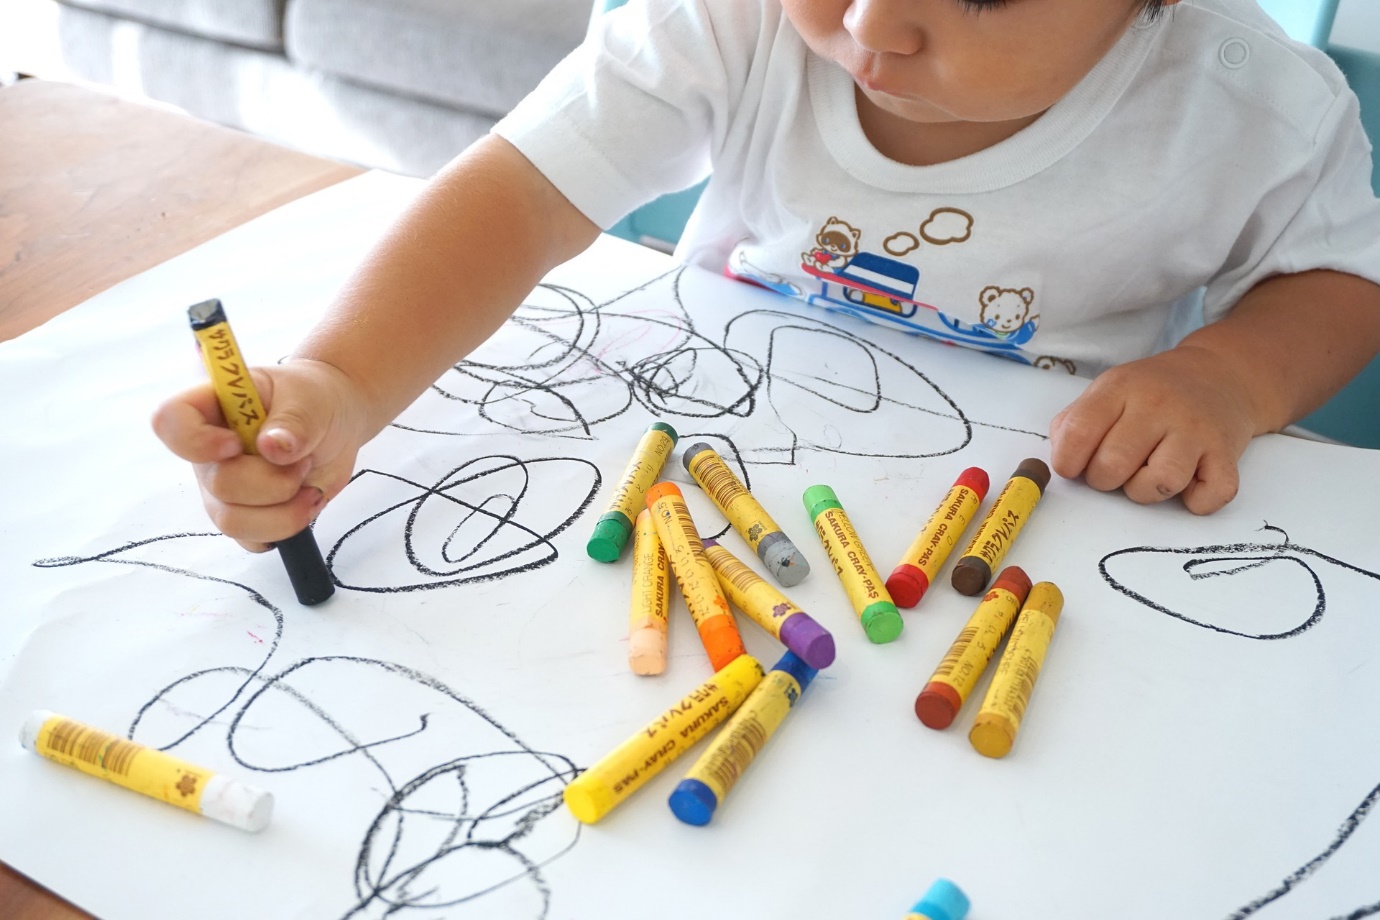 At preschool, little kids scribble their way to sharpening their fine motor skills, which are important for dexterity and writing too!